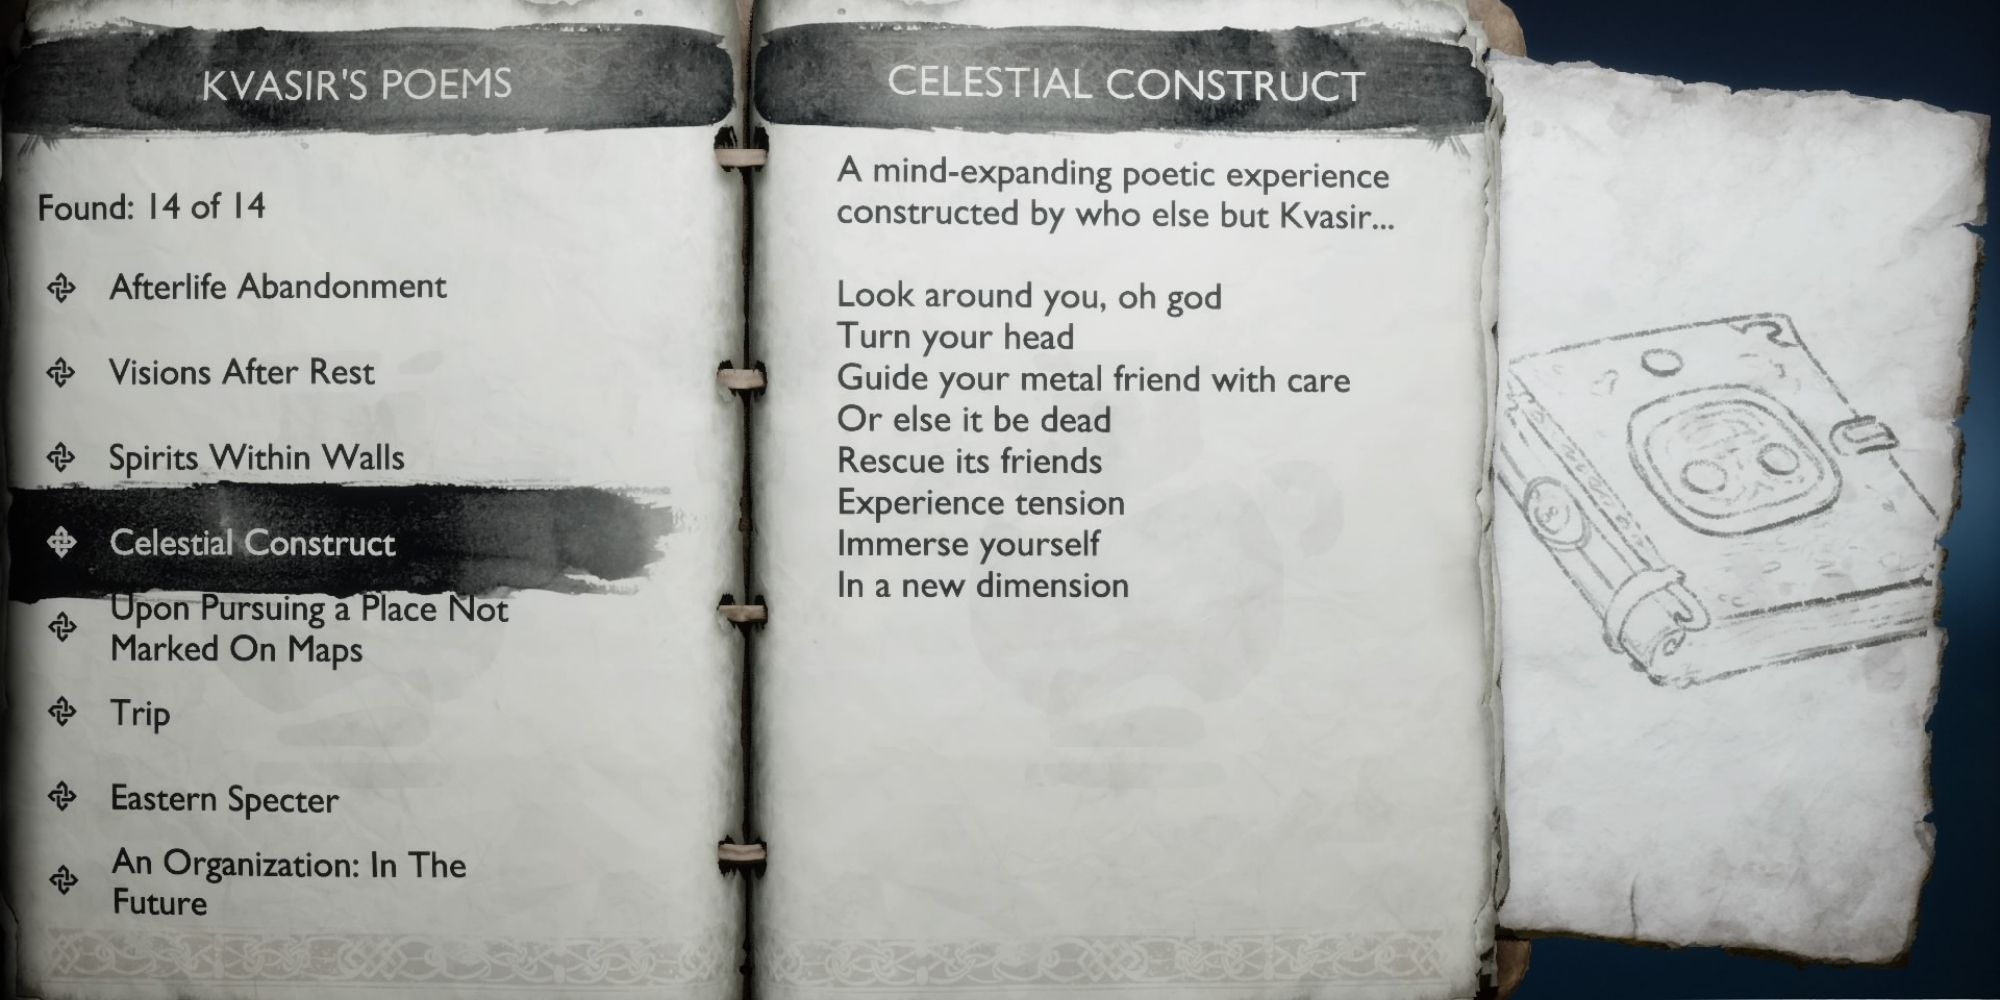 Krato's journal open to the page about Celestial Construct